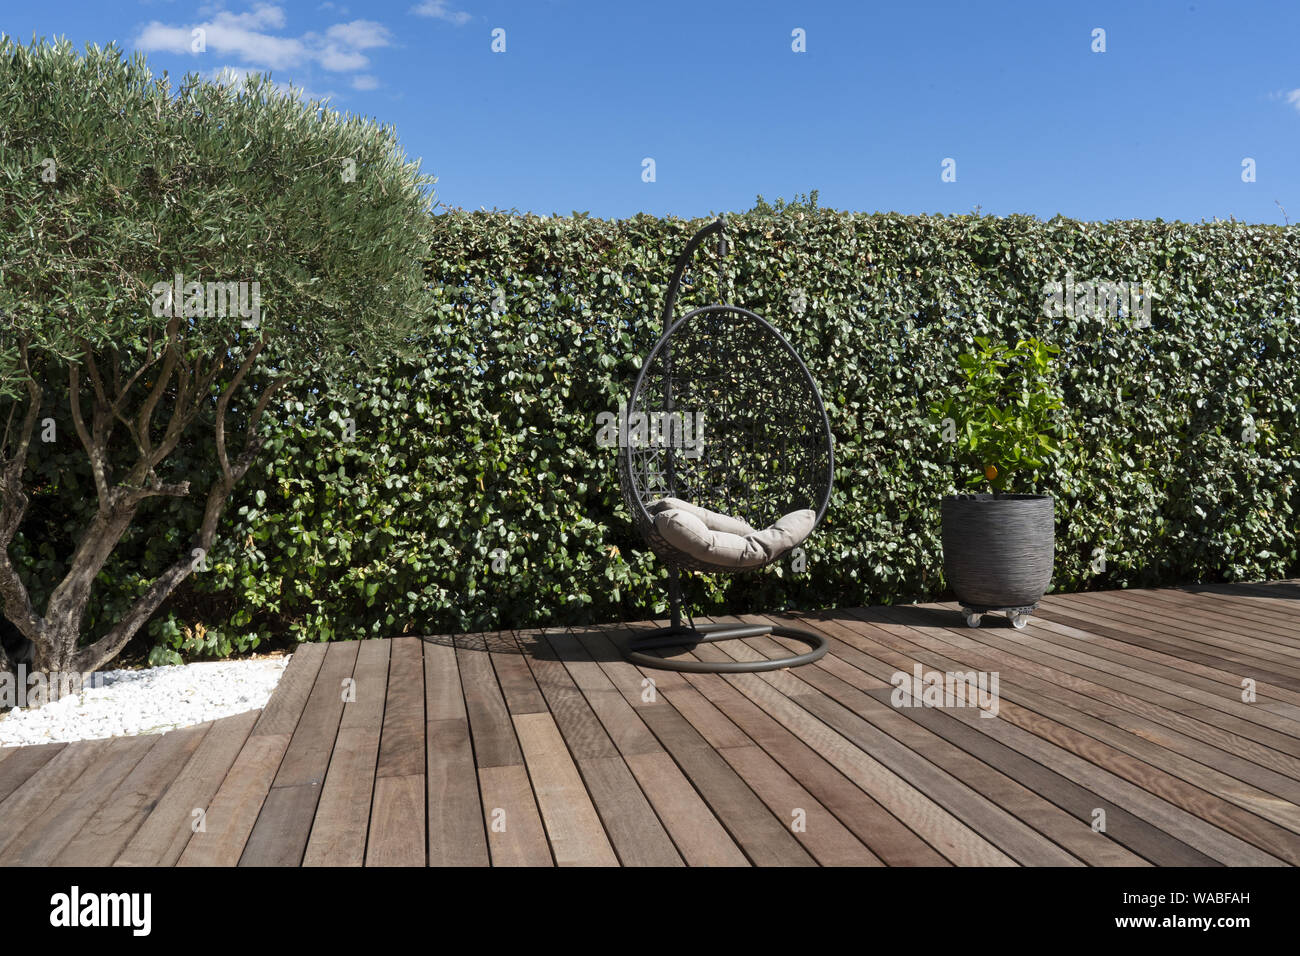 a suspended seat on a wooden floor in a garden with an olive tree Stock Photo